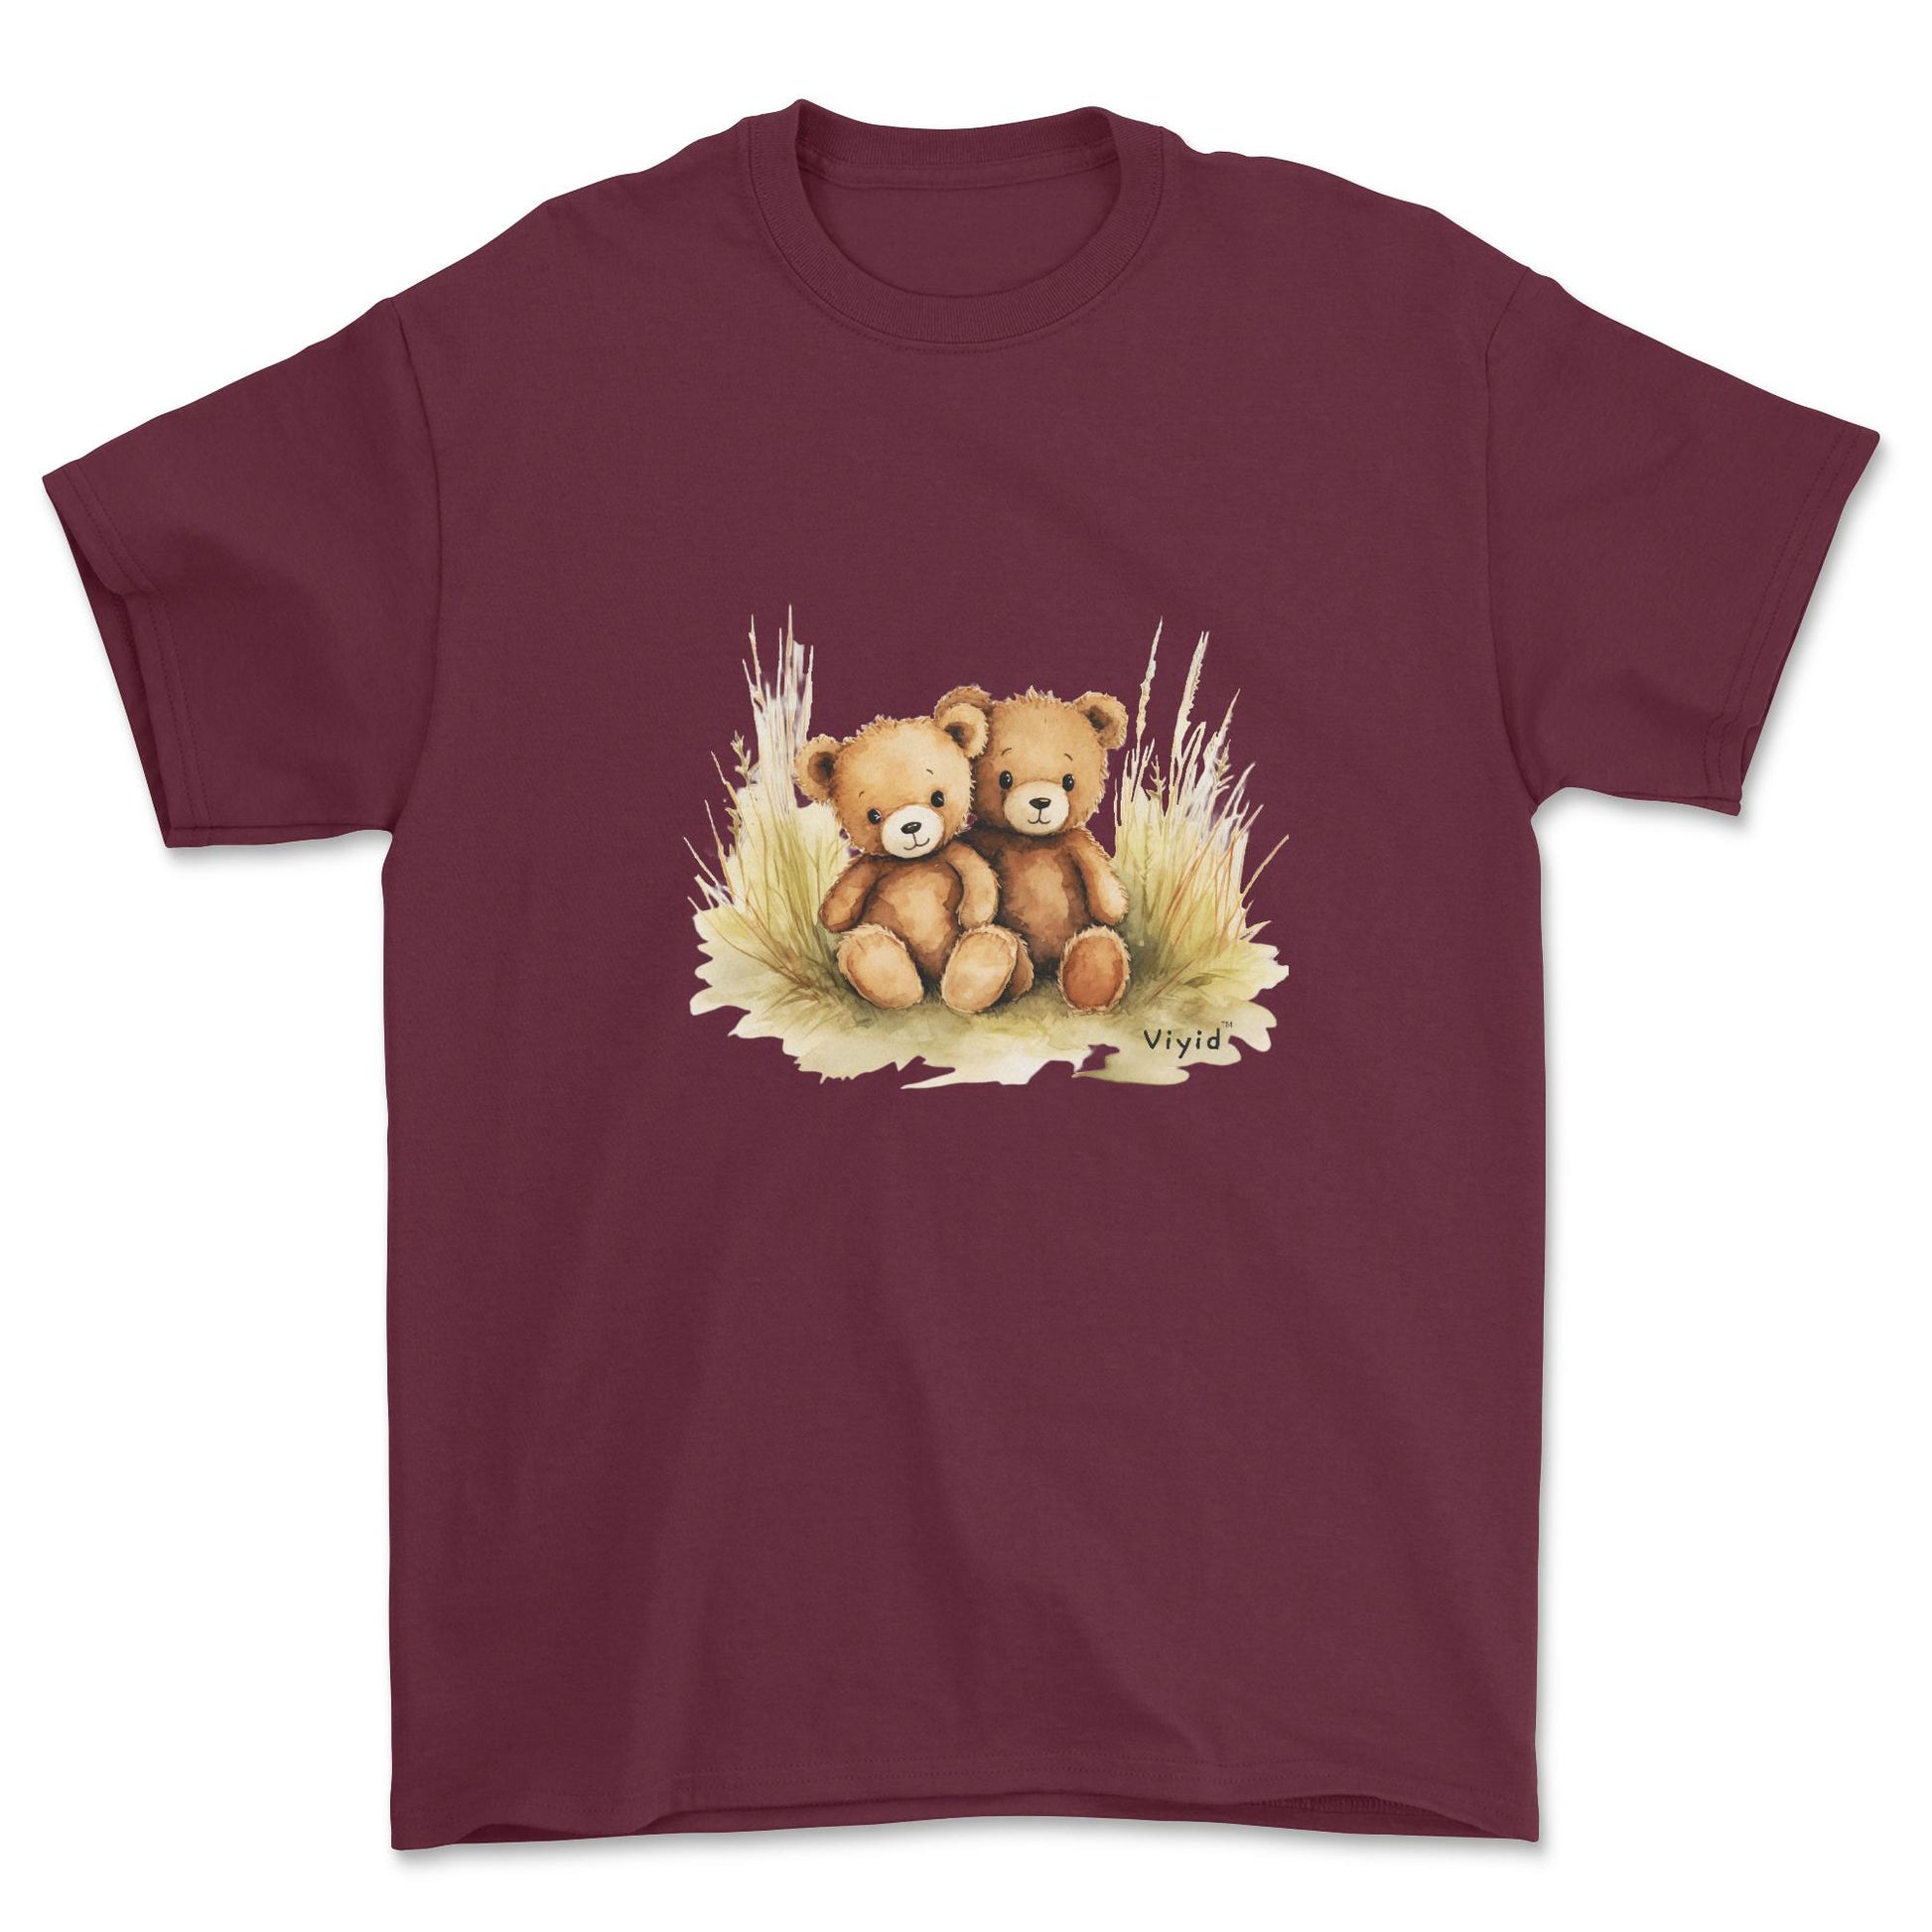 two bears adult t-shirt maroon